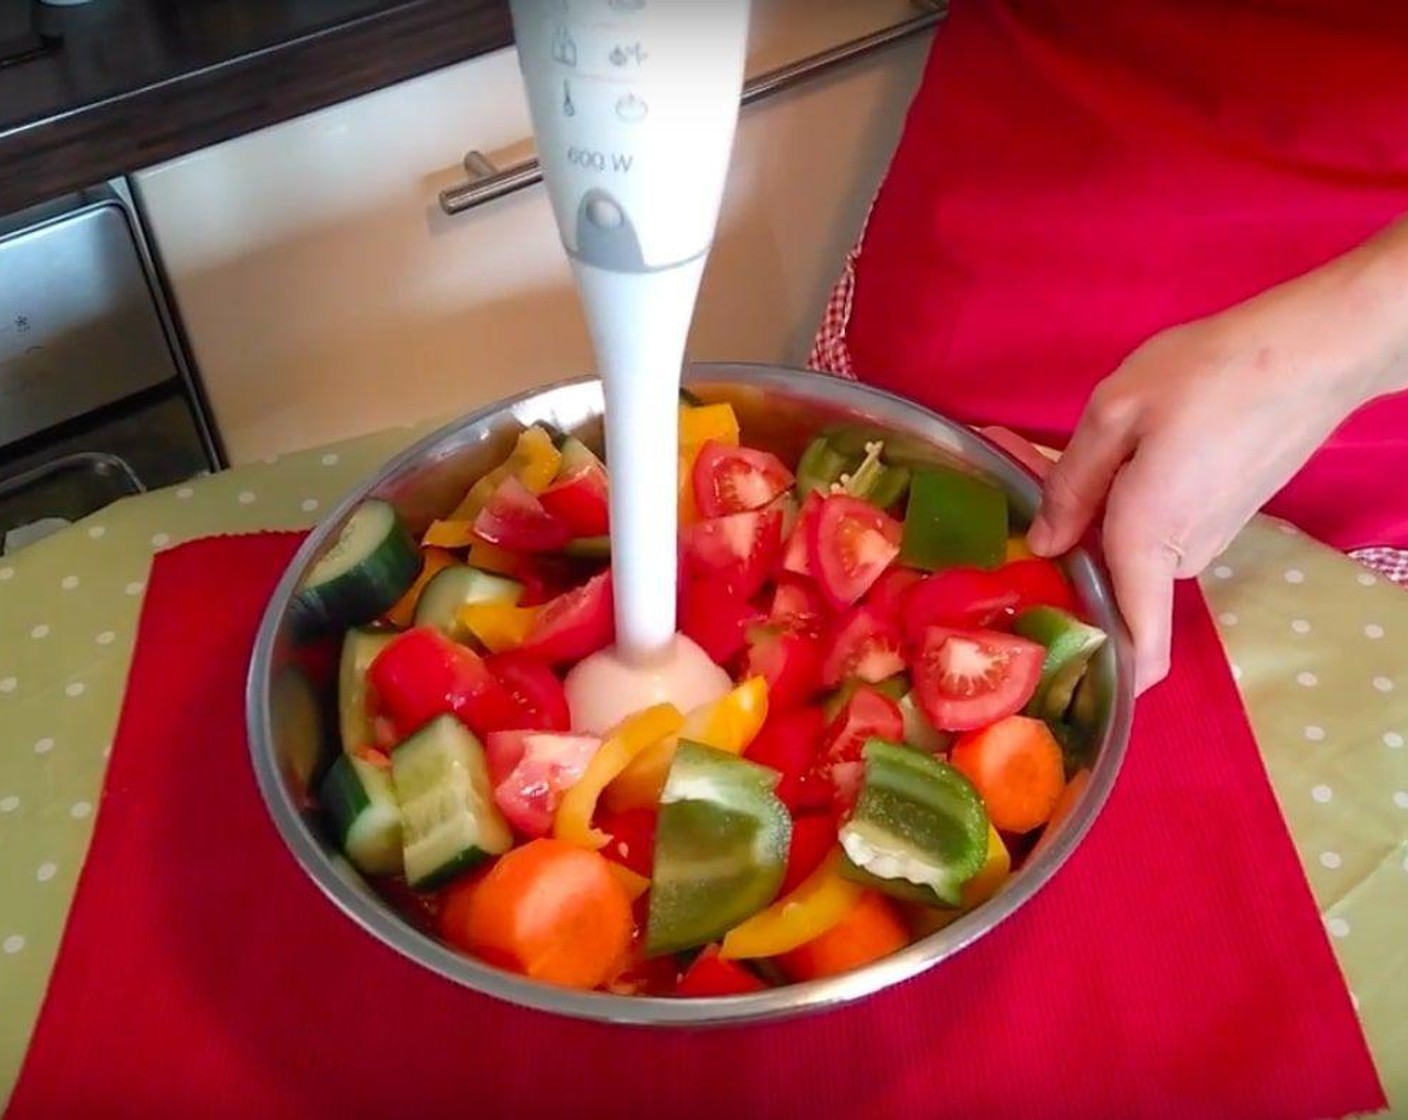 step 5 Add all the vegetables to a bowl and blend with a stick blender. You can also put everything in a regular blender.